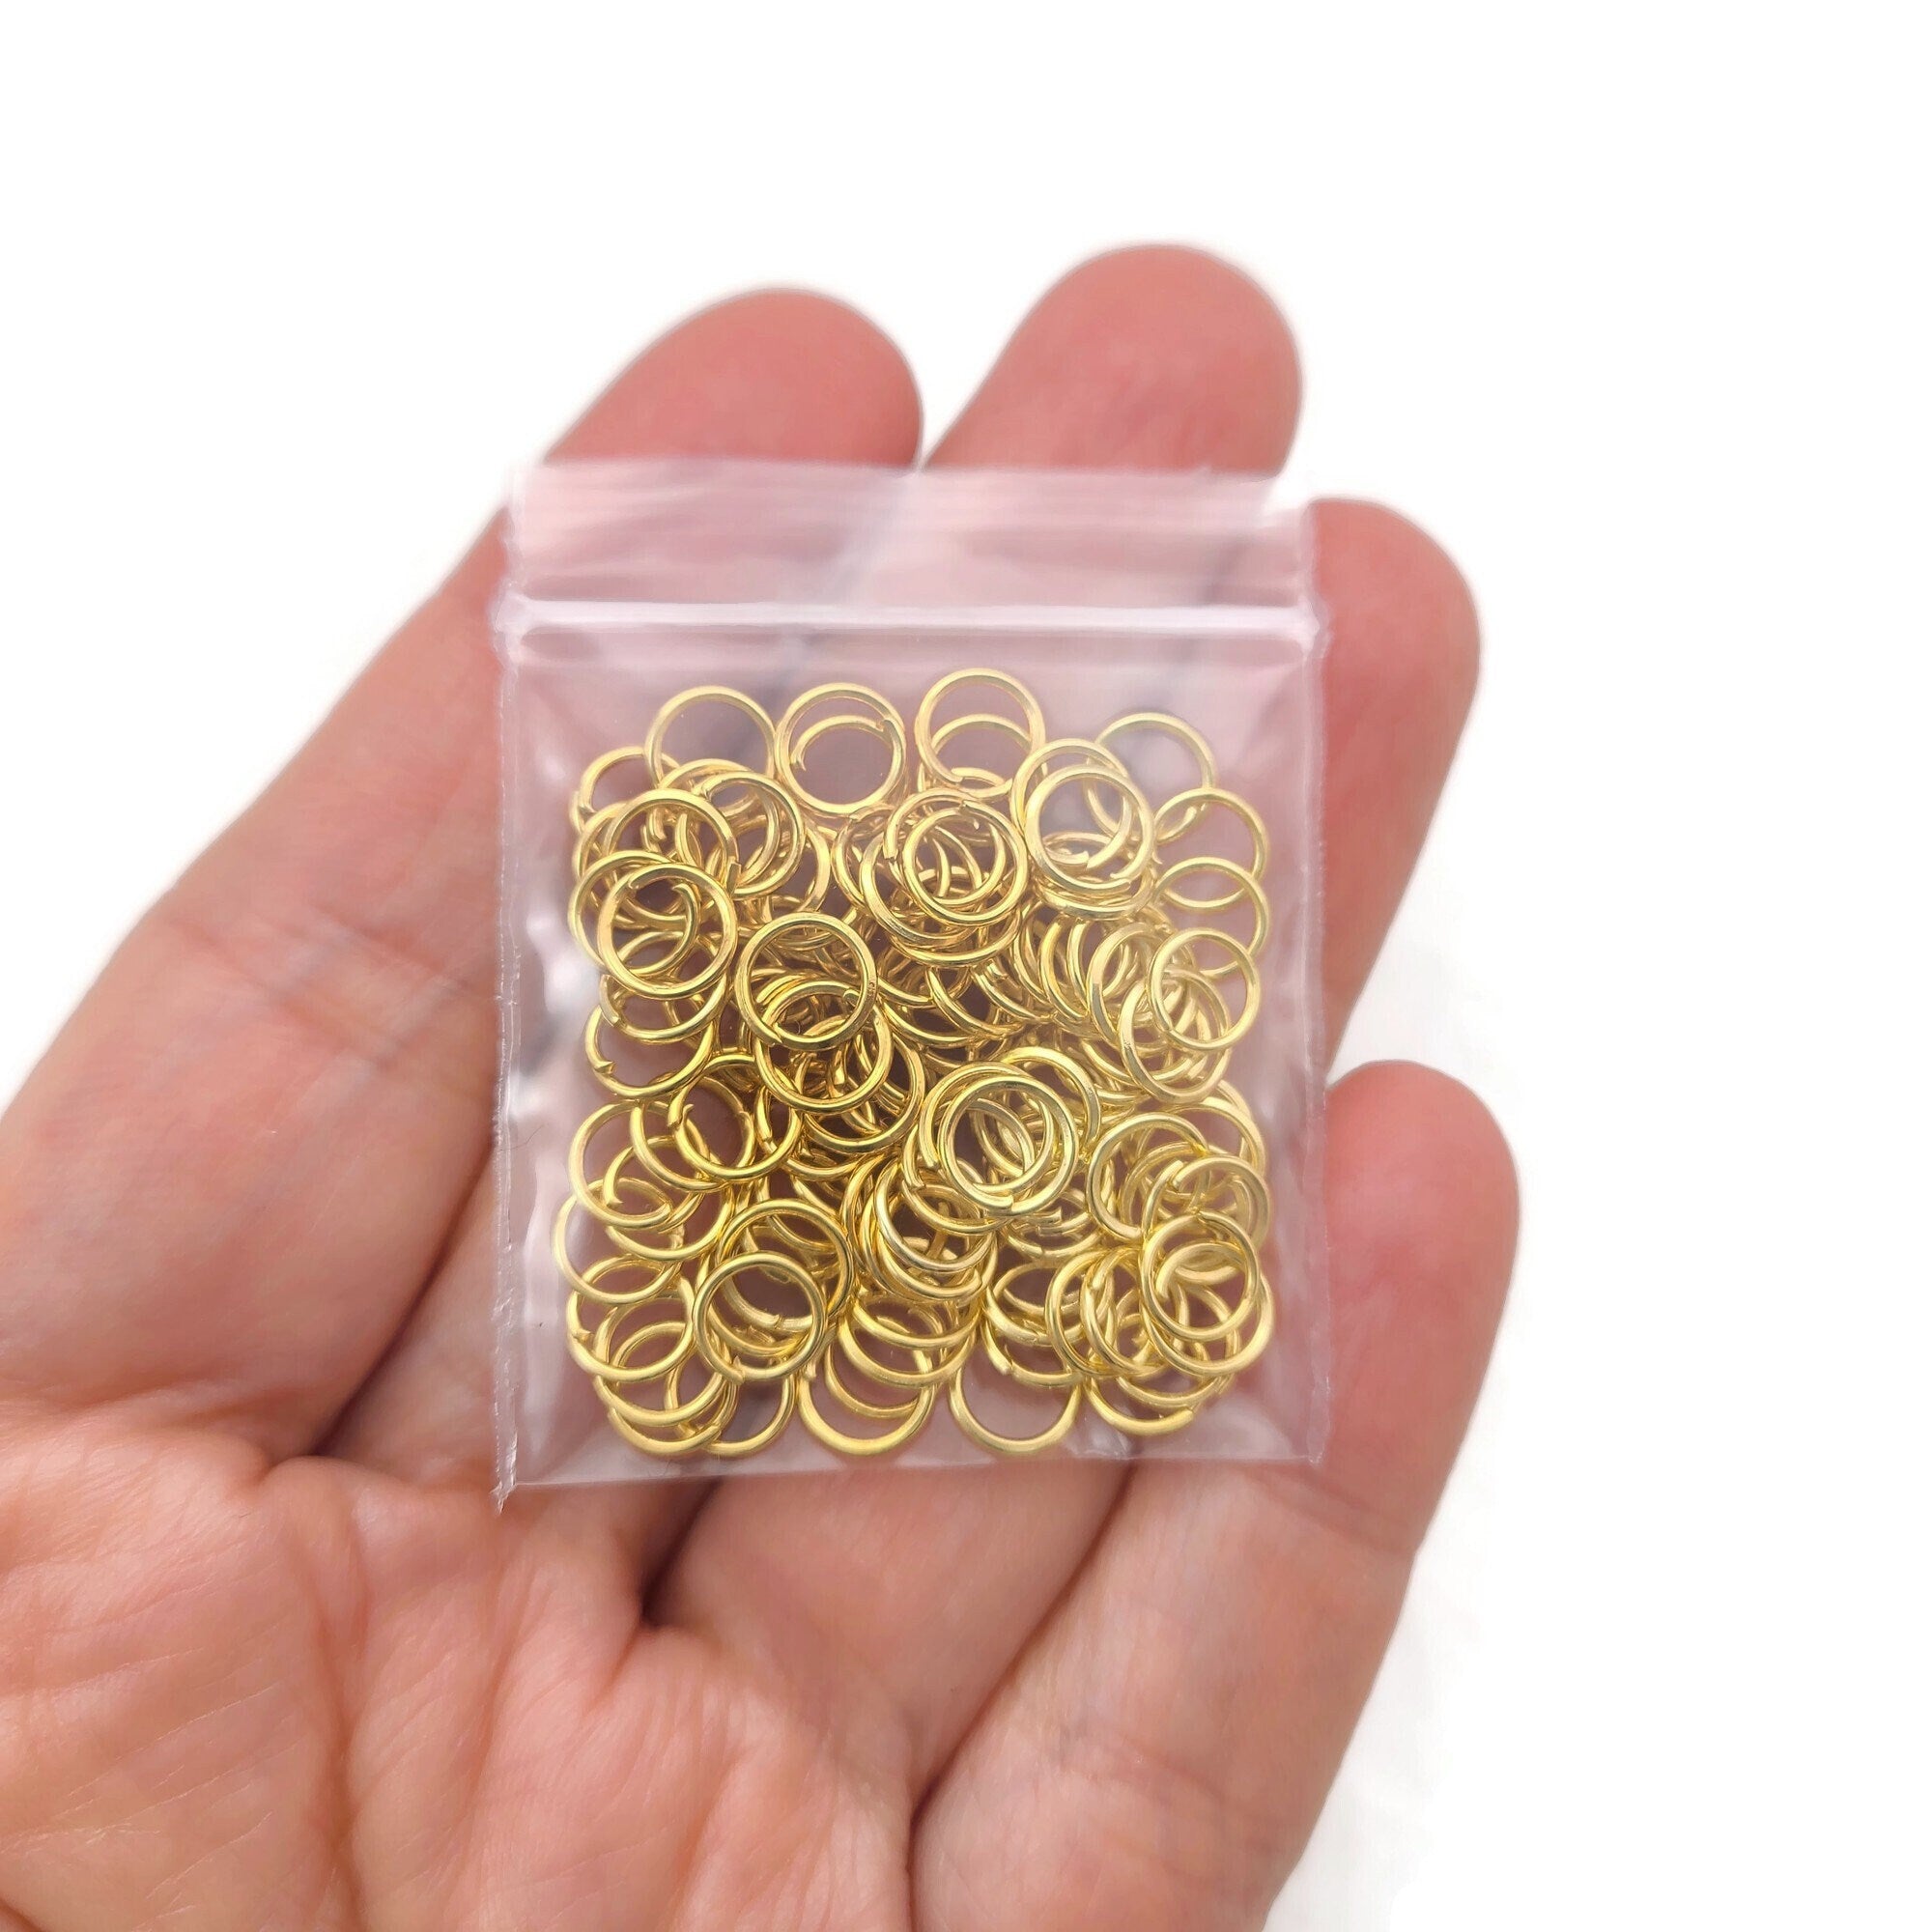 Hypoallergenic gold jump rings, 4mm, 5mm, 6mm, 7mm, 8mm, Bulk jewelry findings, Nickel free, lead free and cadmium free